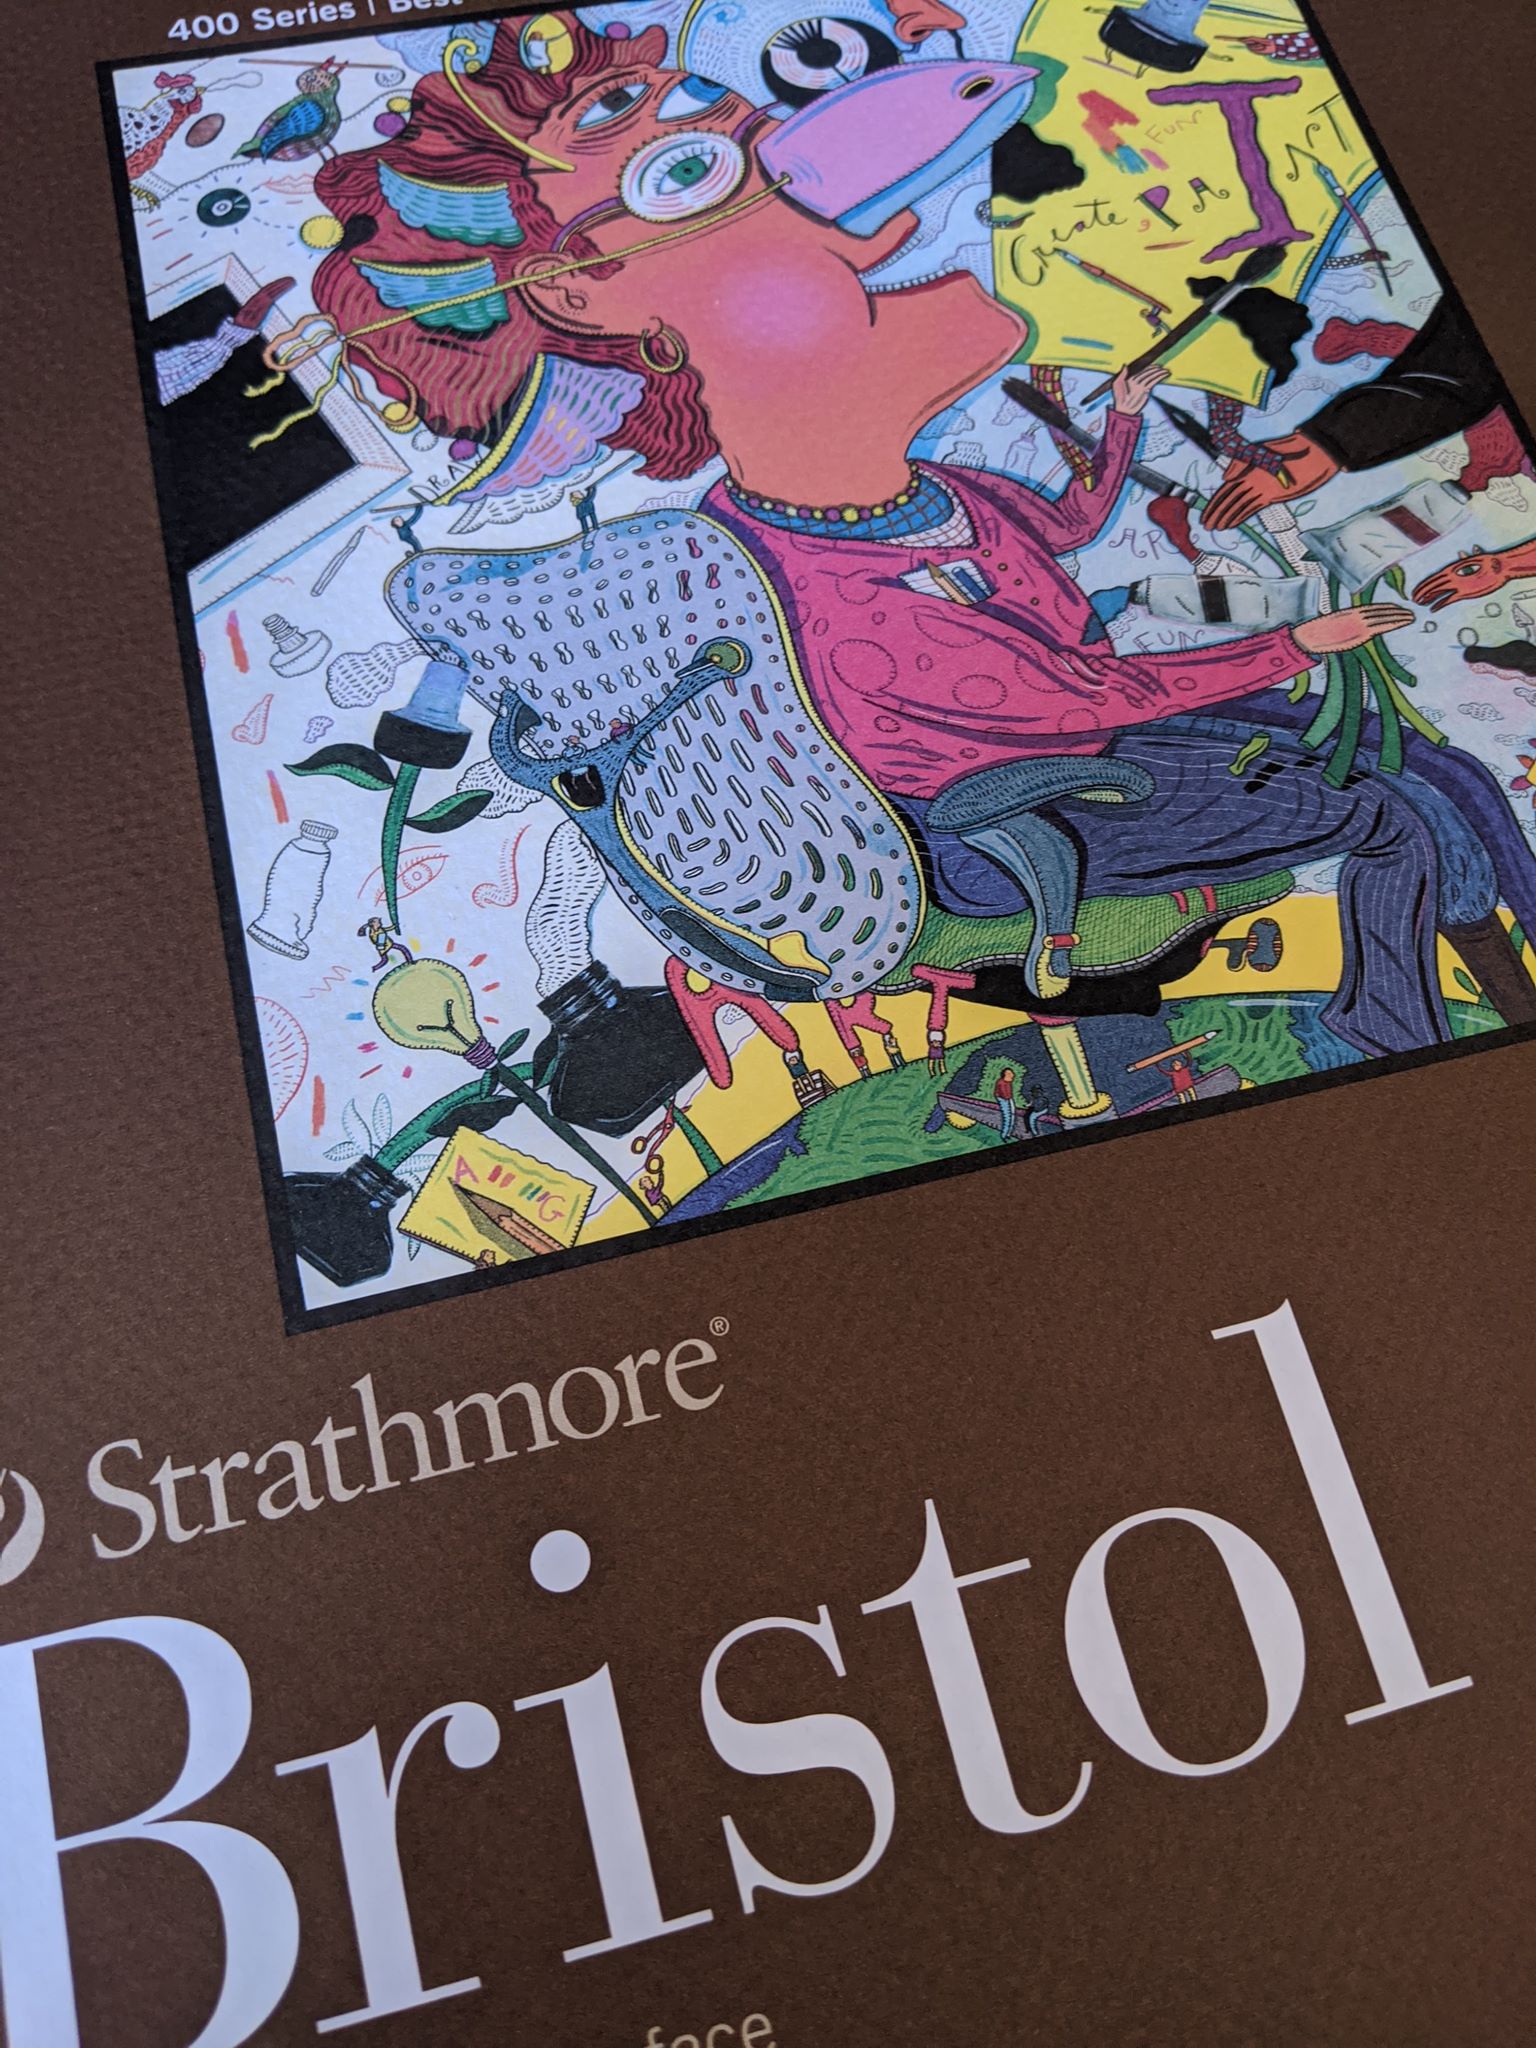  Strathmore 300 Series Bristol Paper Pad, Smooth, Tape Bound,  9x12 inches, 20 Sheets (100lb/270g) - Artist Paper for Adults and Students  - Markers, Pen and Ink